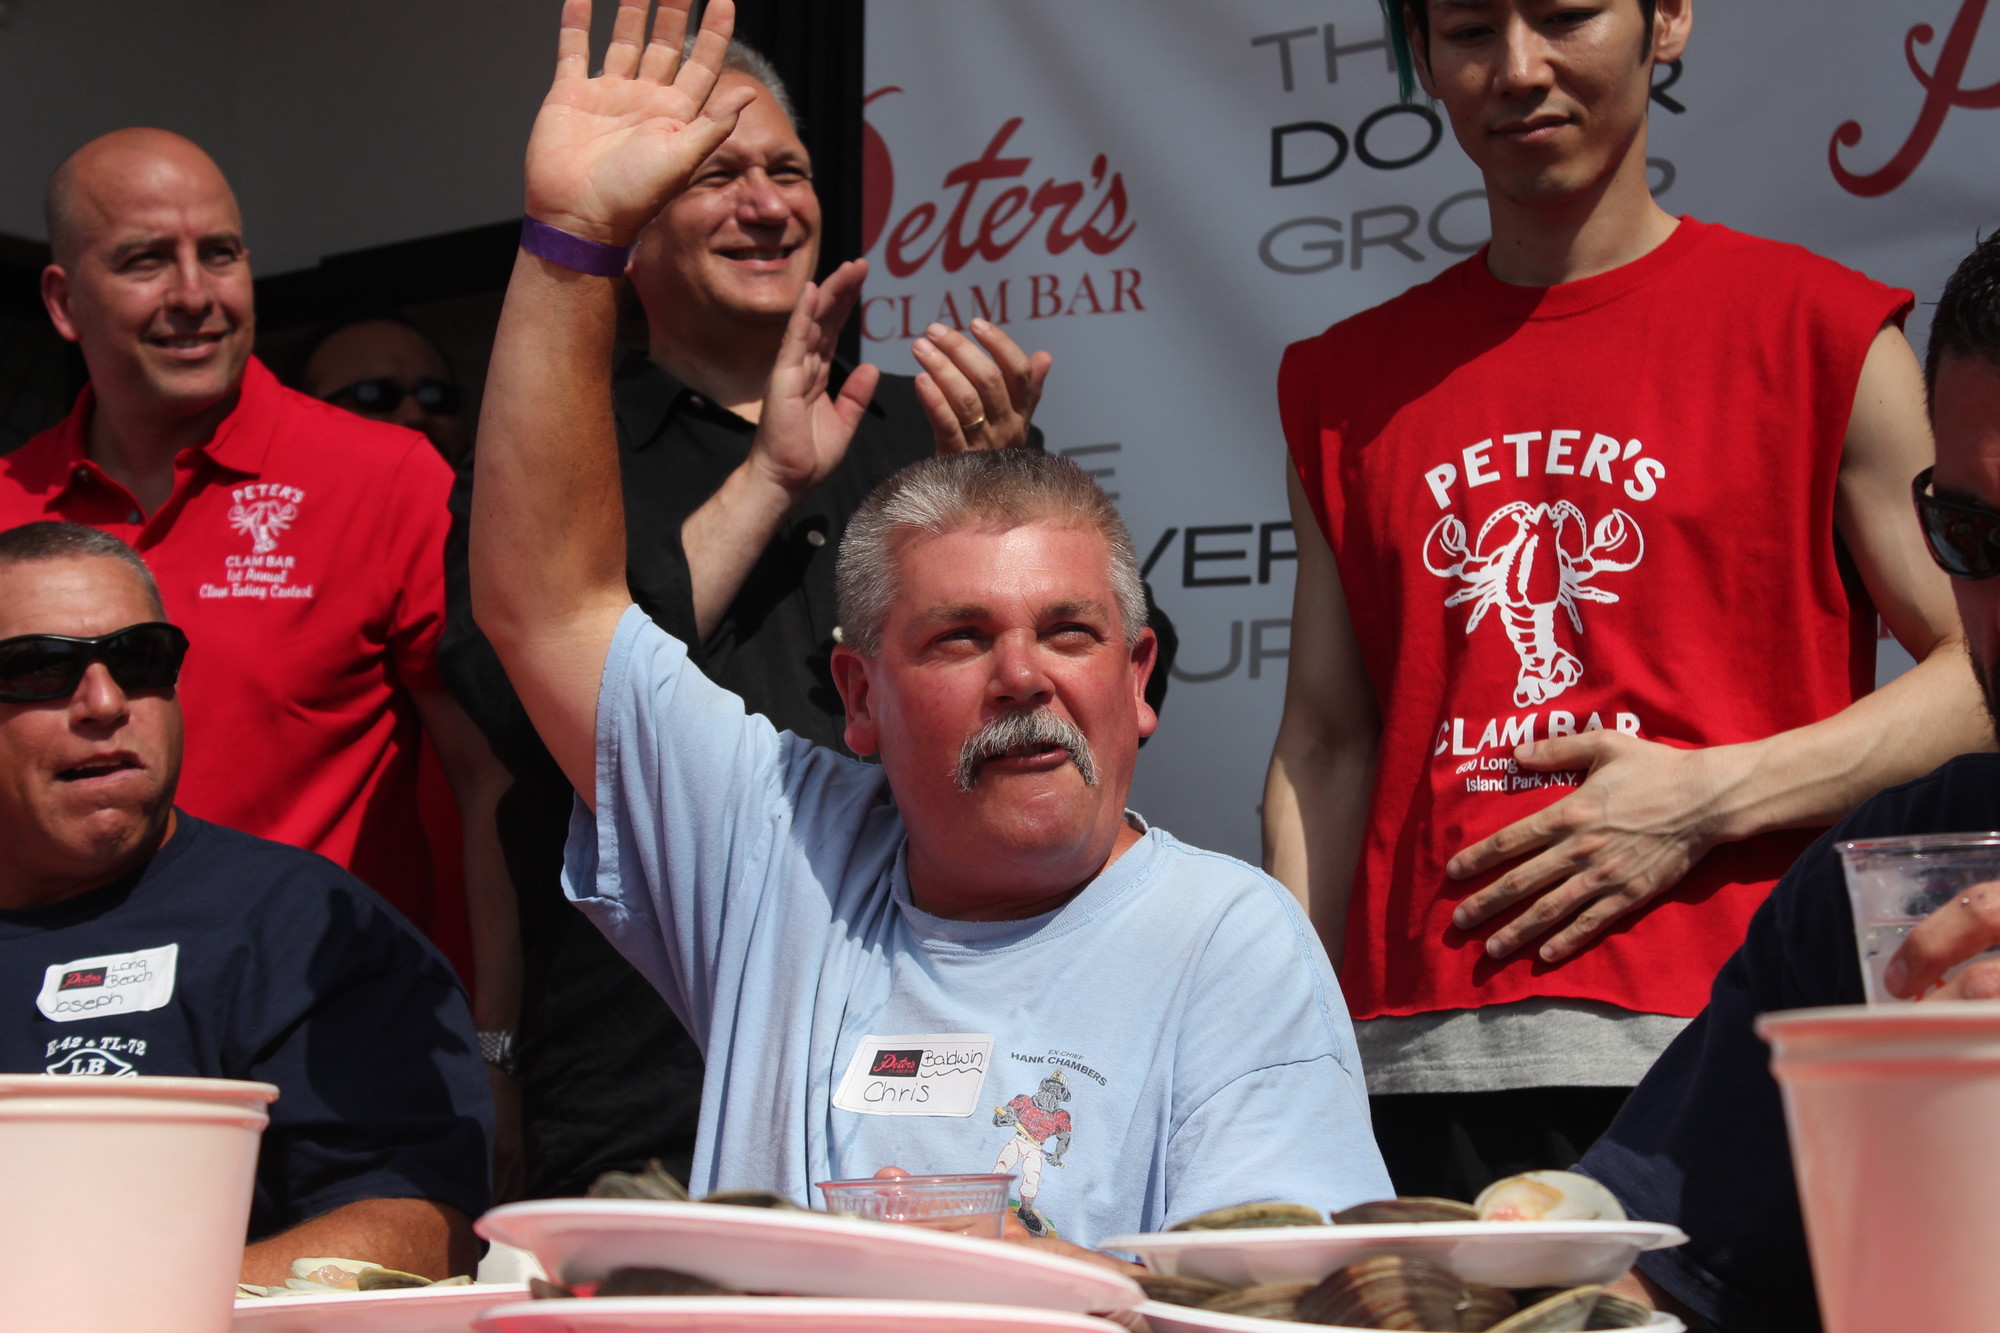 Former chief from Baldwin Chris Neville ate 91 clams total to secure third place overall.